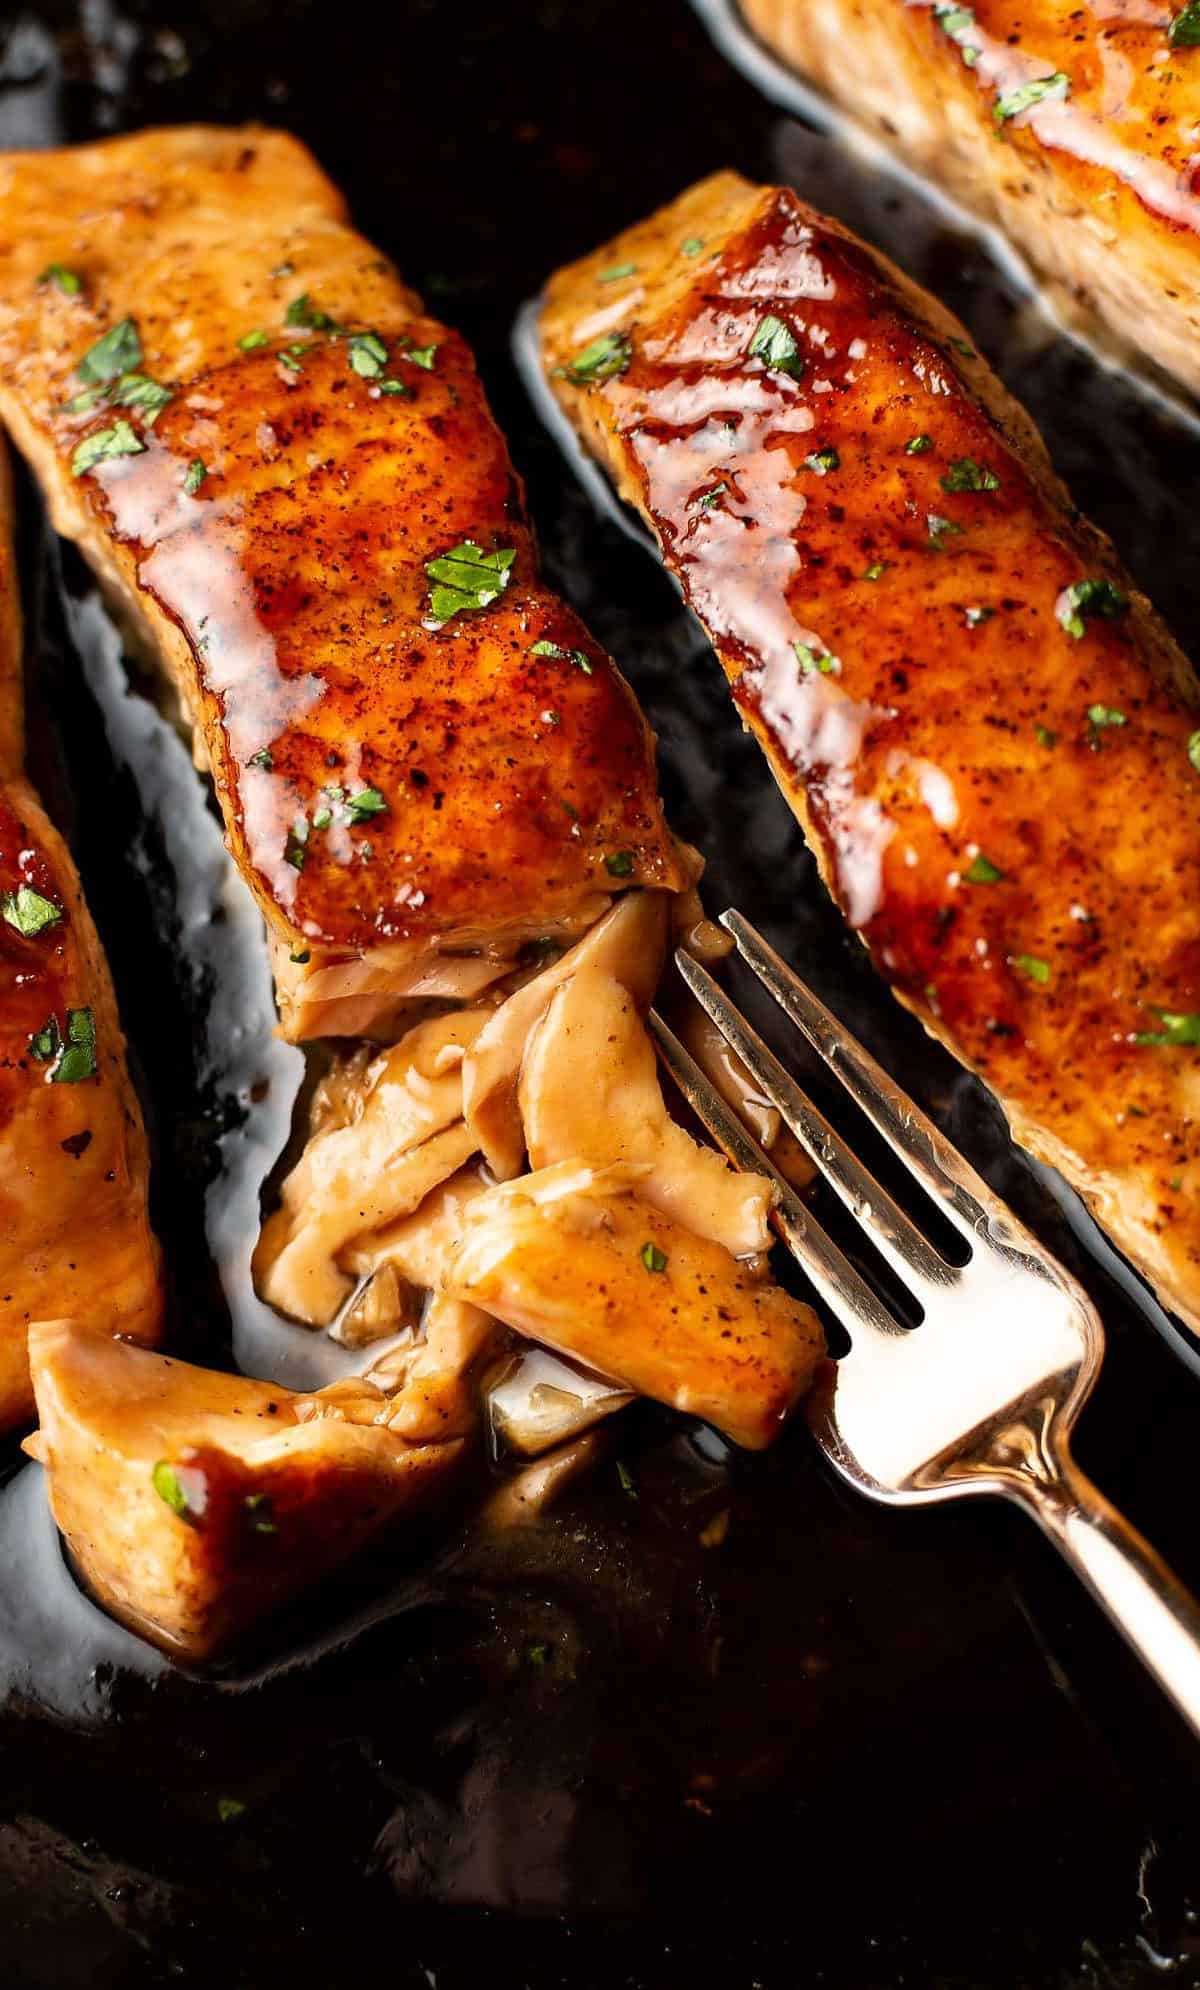  A perfect combination of savory and sweet: Mustard brown sugar glazed salmon